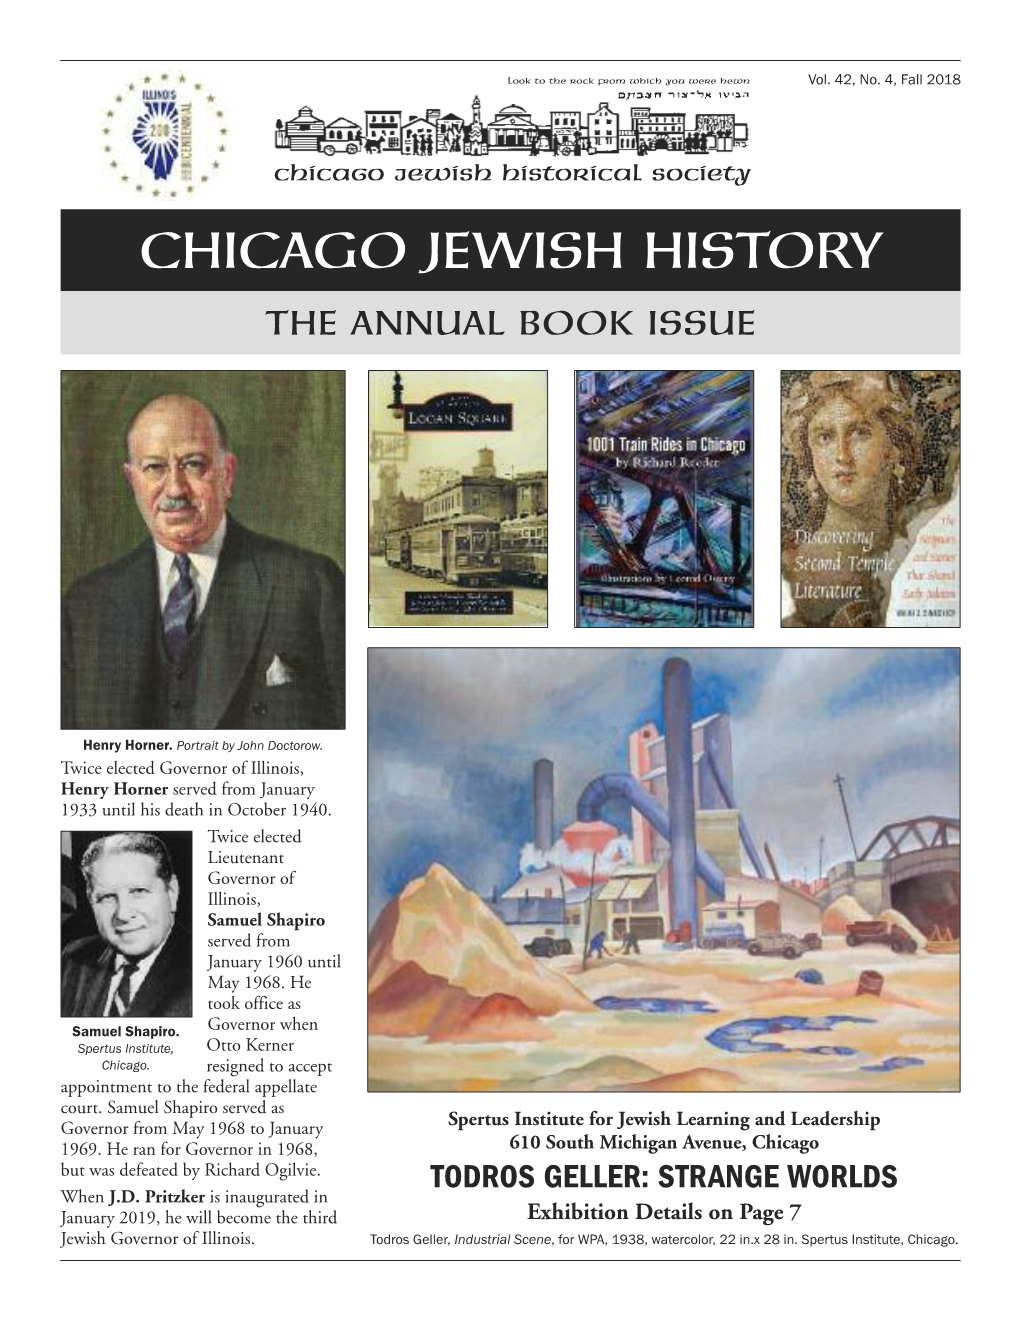 Chicago Jewish History the Annual Book Issue